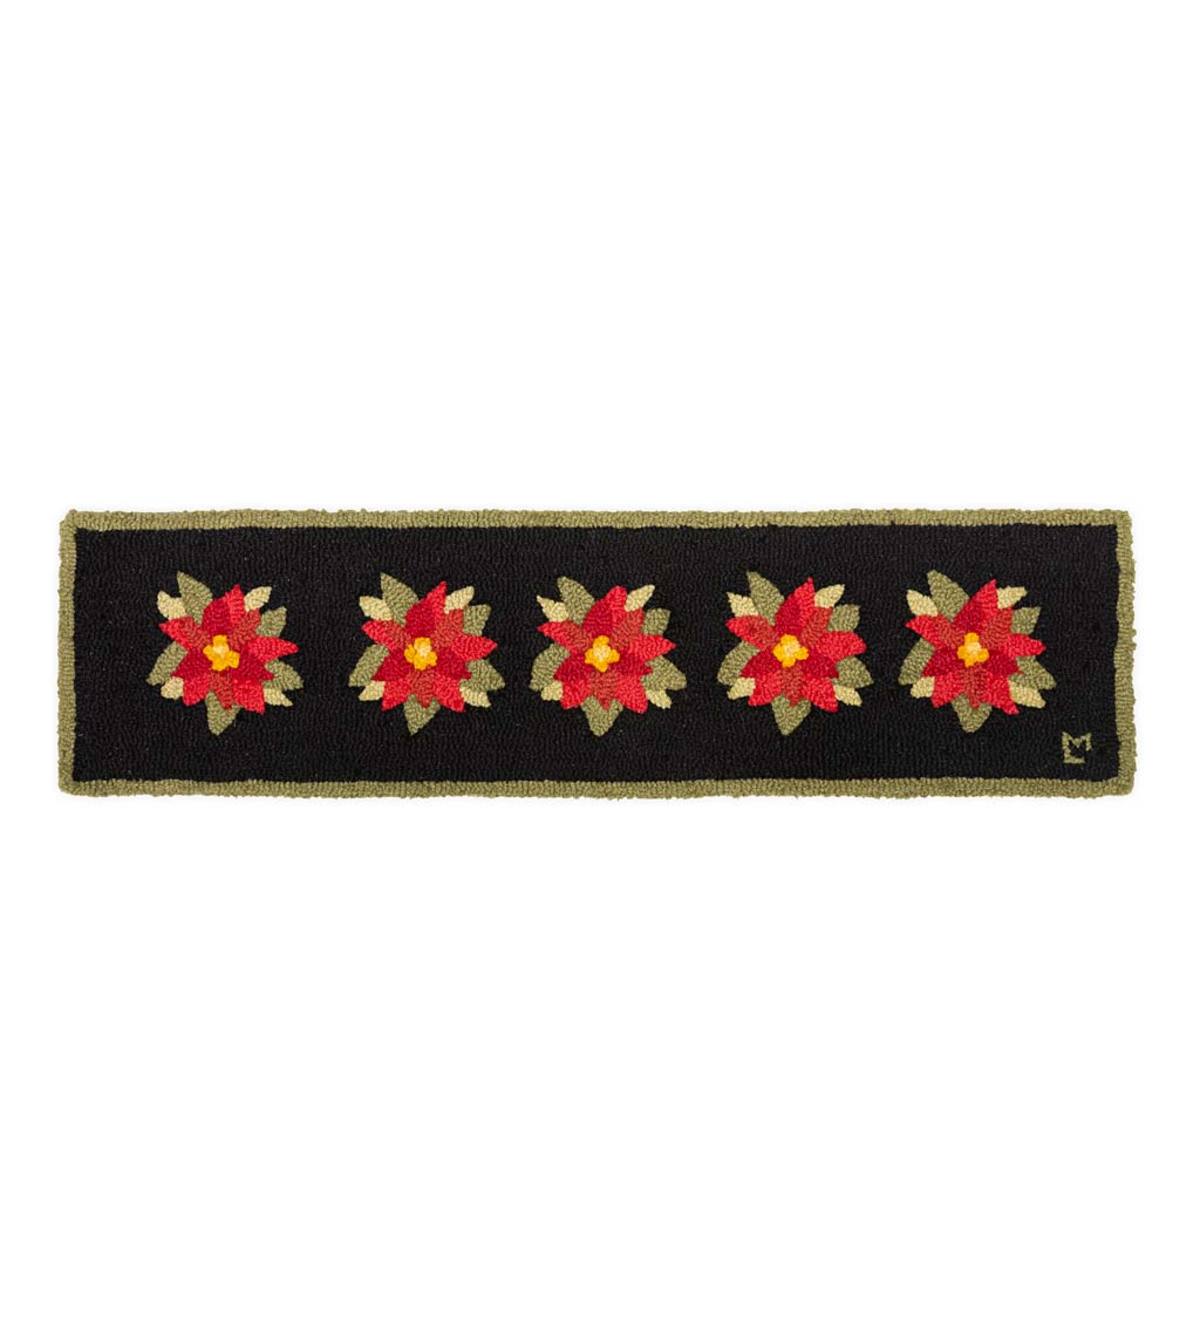 Poinsettia Hooked Wool Holiday Hearth Runner | Plow & Hearth